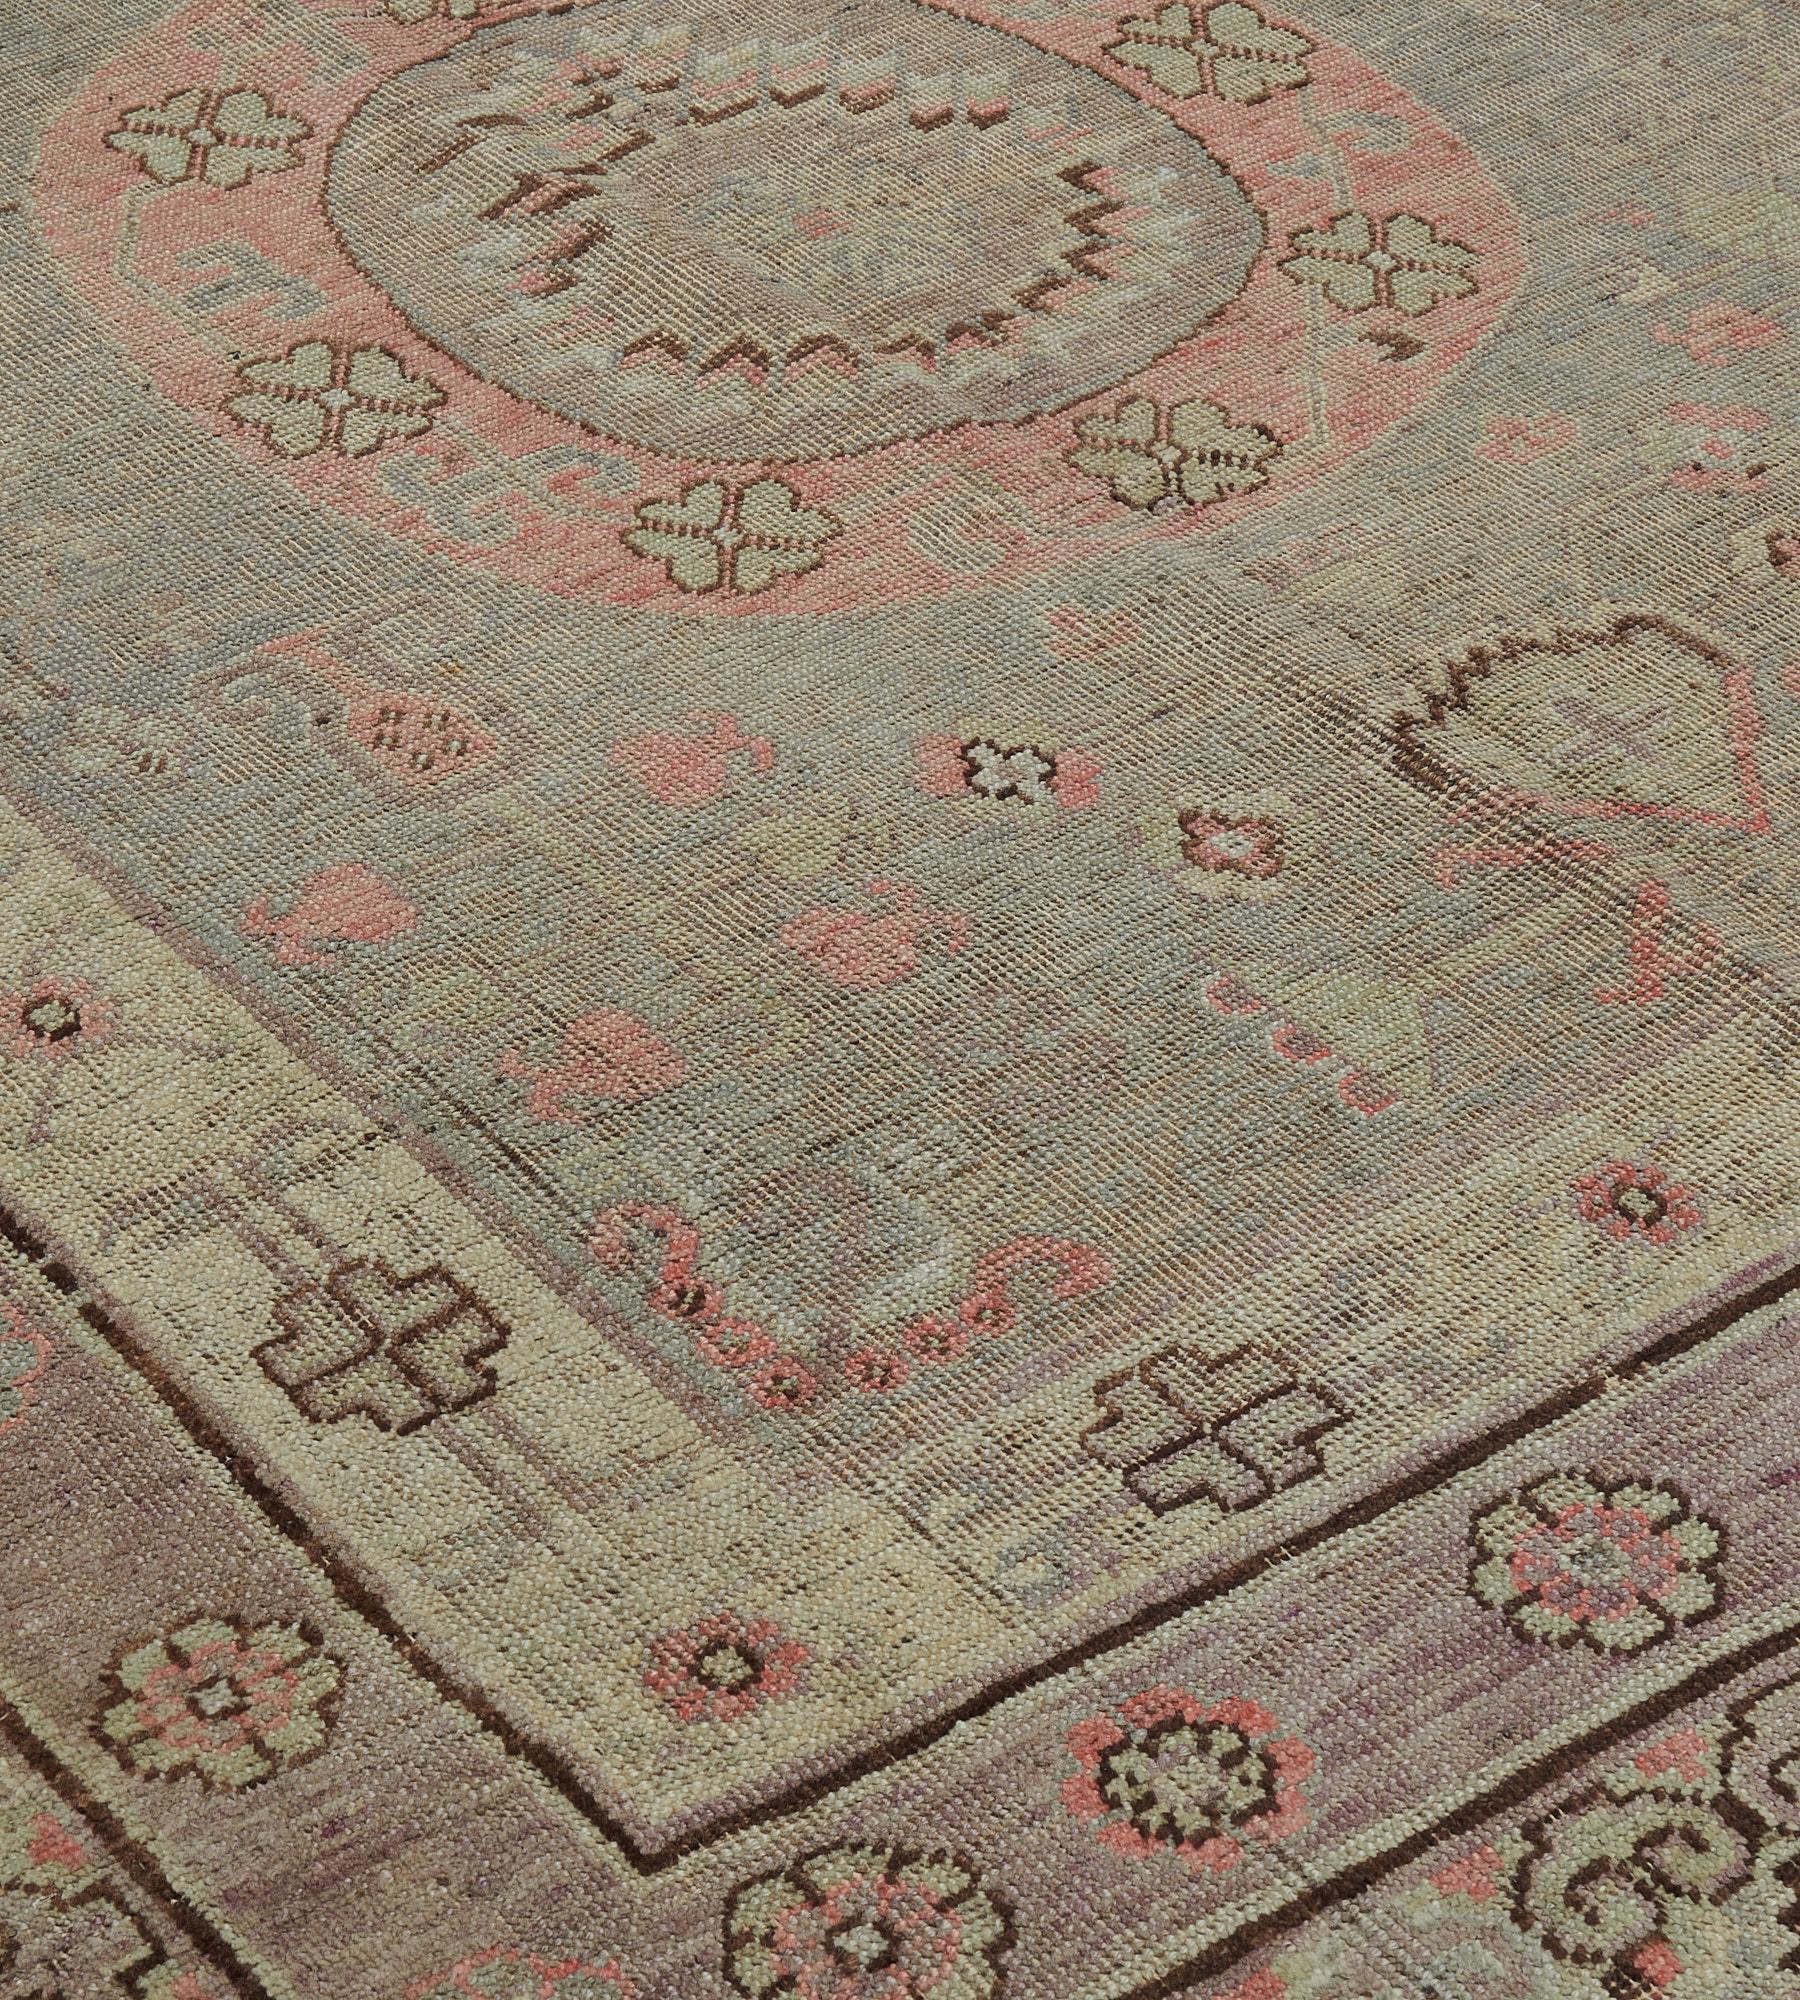 This antique Khotan rug features a shaded steel-blue field with a variety of floral motifs around a pair of dusty-pink roundels each with a band of linked flowerheads around a shaded steel-blue central panel with a radiating flowerhead, in a shaded